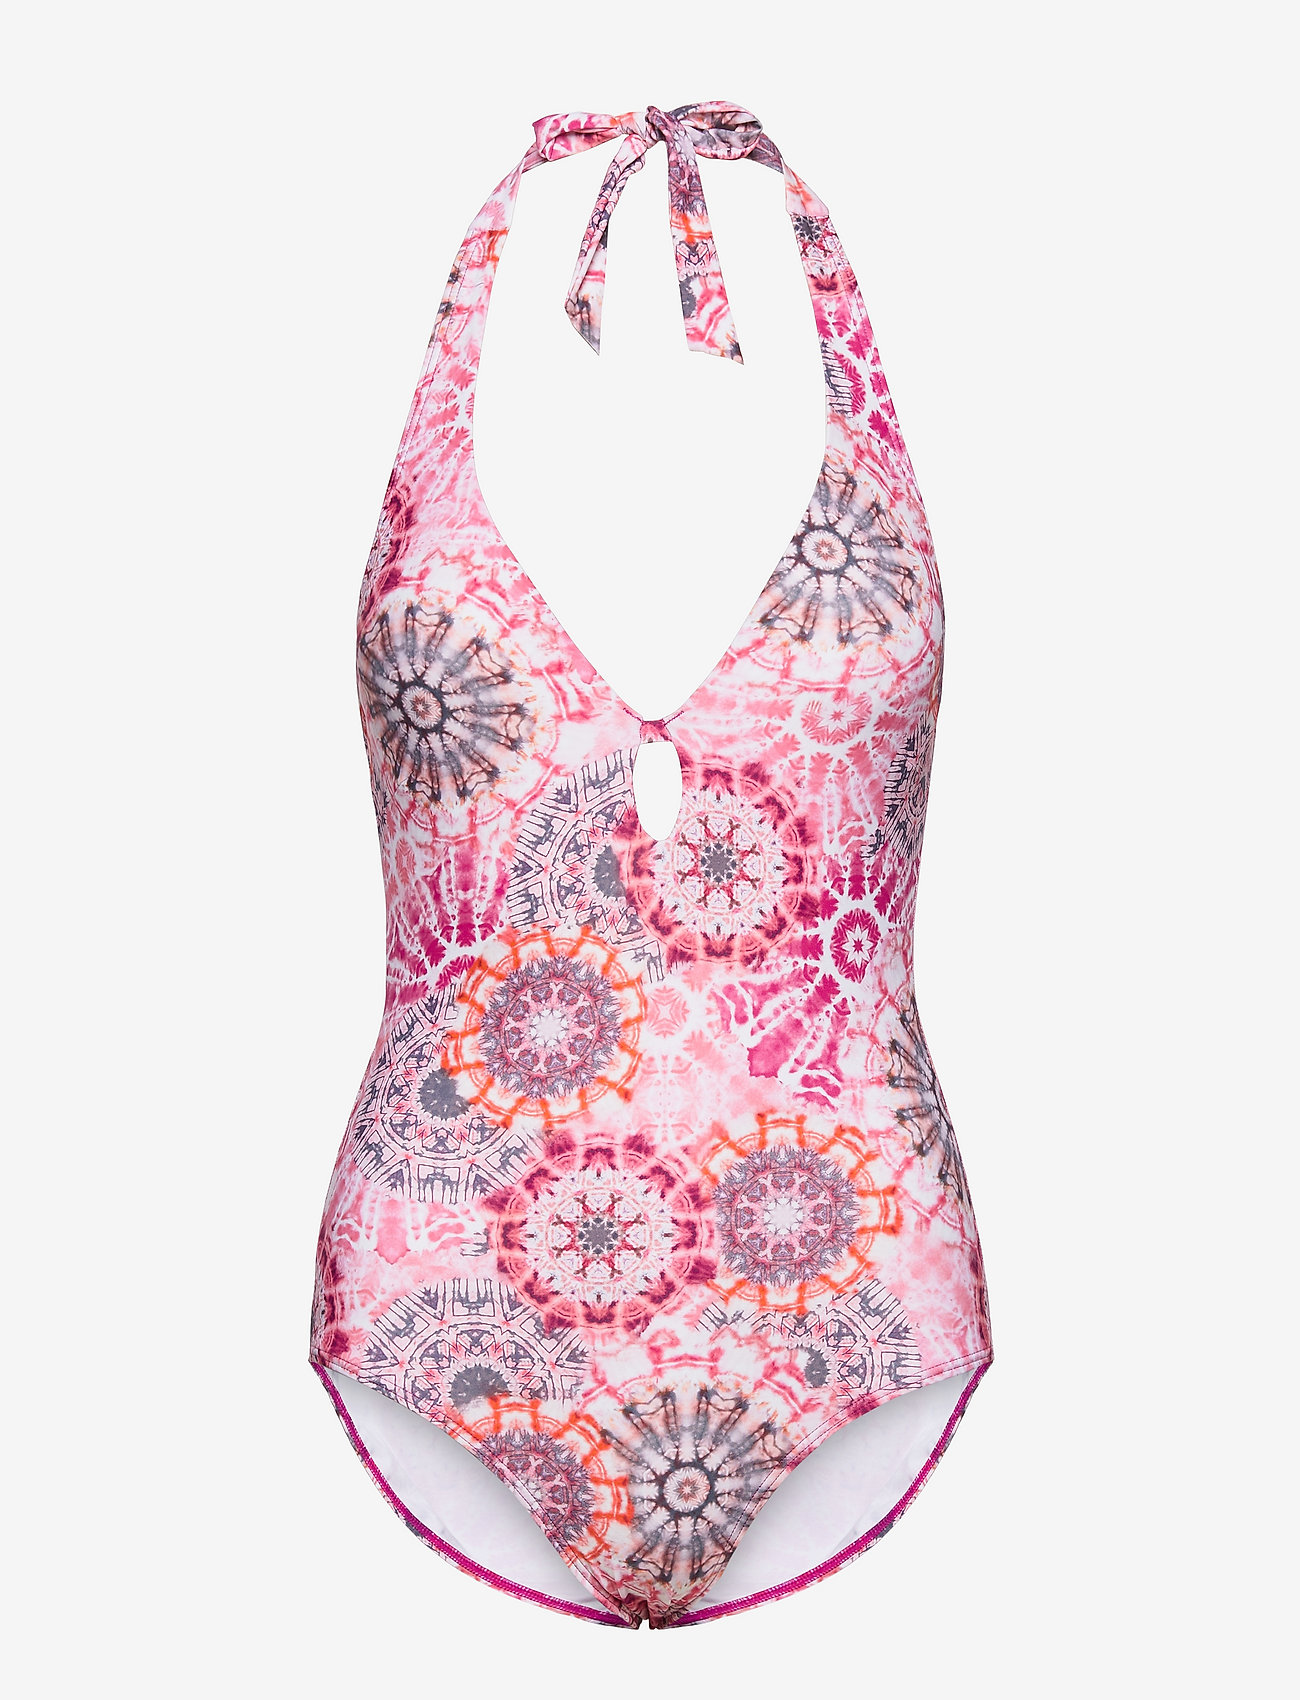 Esprit Bodywear Women - Recycled: swimsuit with a print - swimsuits - pink 3 - 0